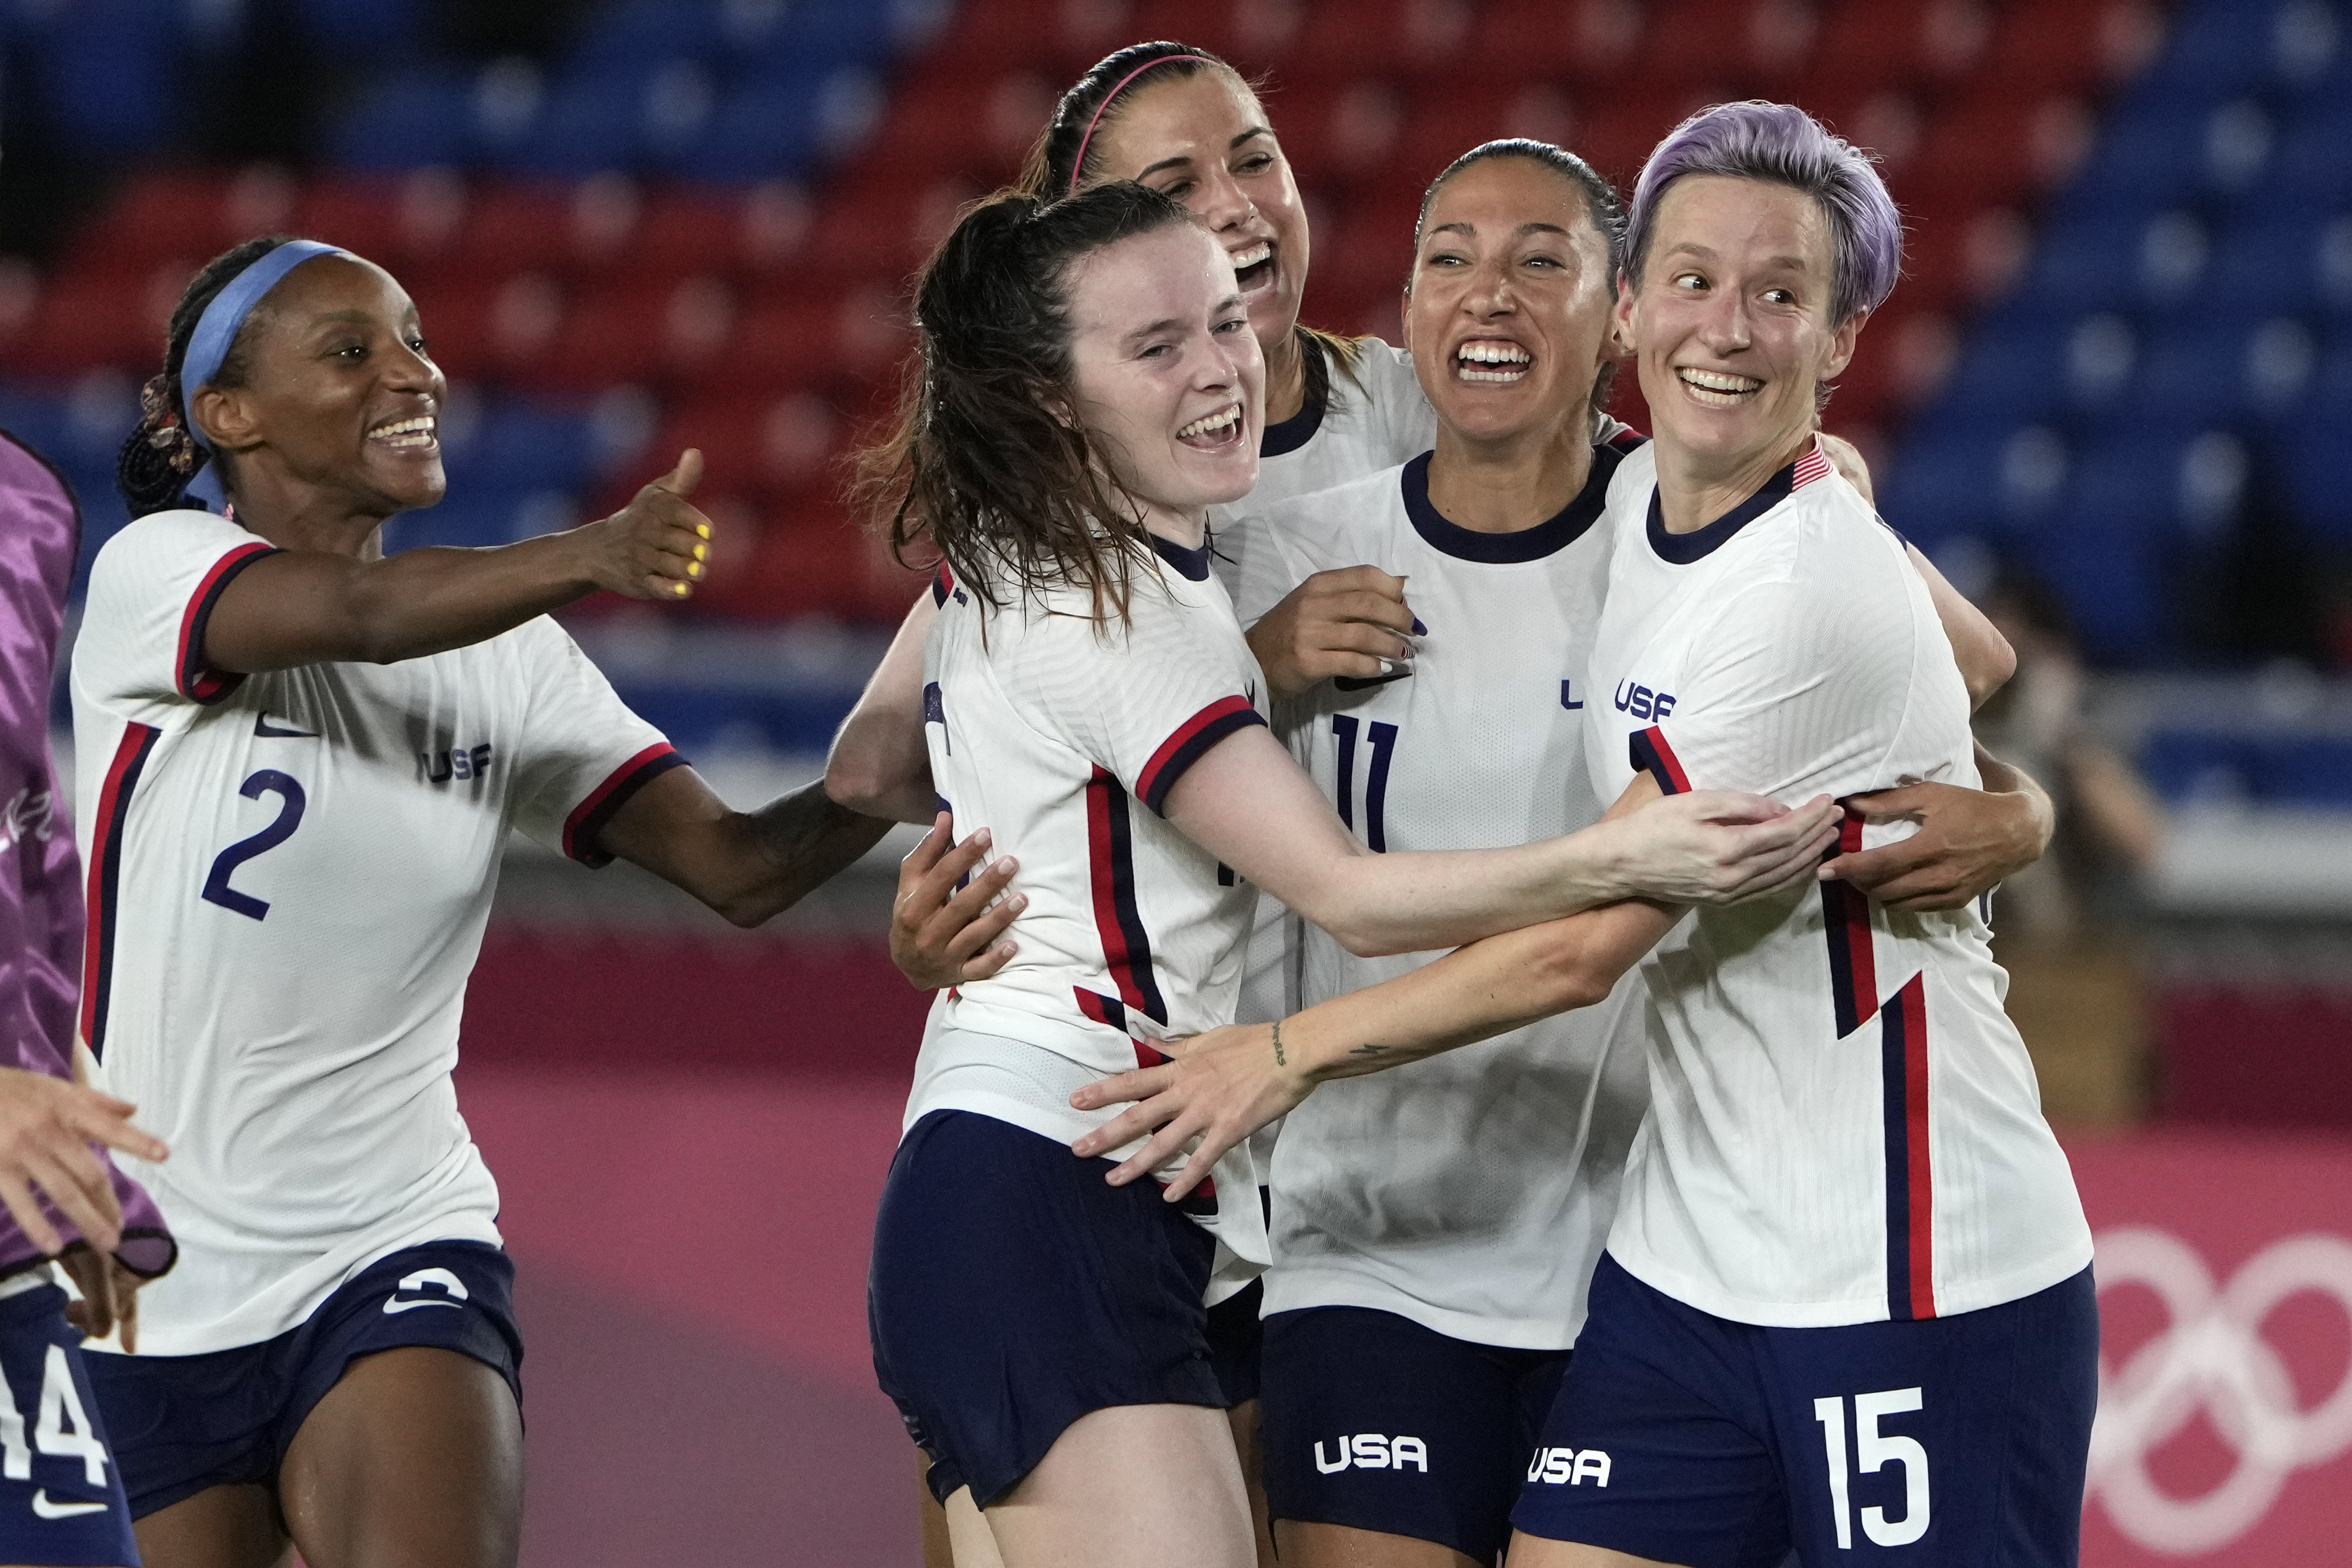 Usa Women S Soccer Vs Australia Free Live Stream 8 5 21 Watch Uswnt In Bronze Medal Match At Tokyo Olympics Time Usa Tv Channel Nj Com